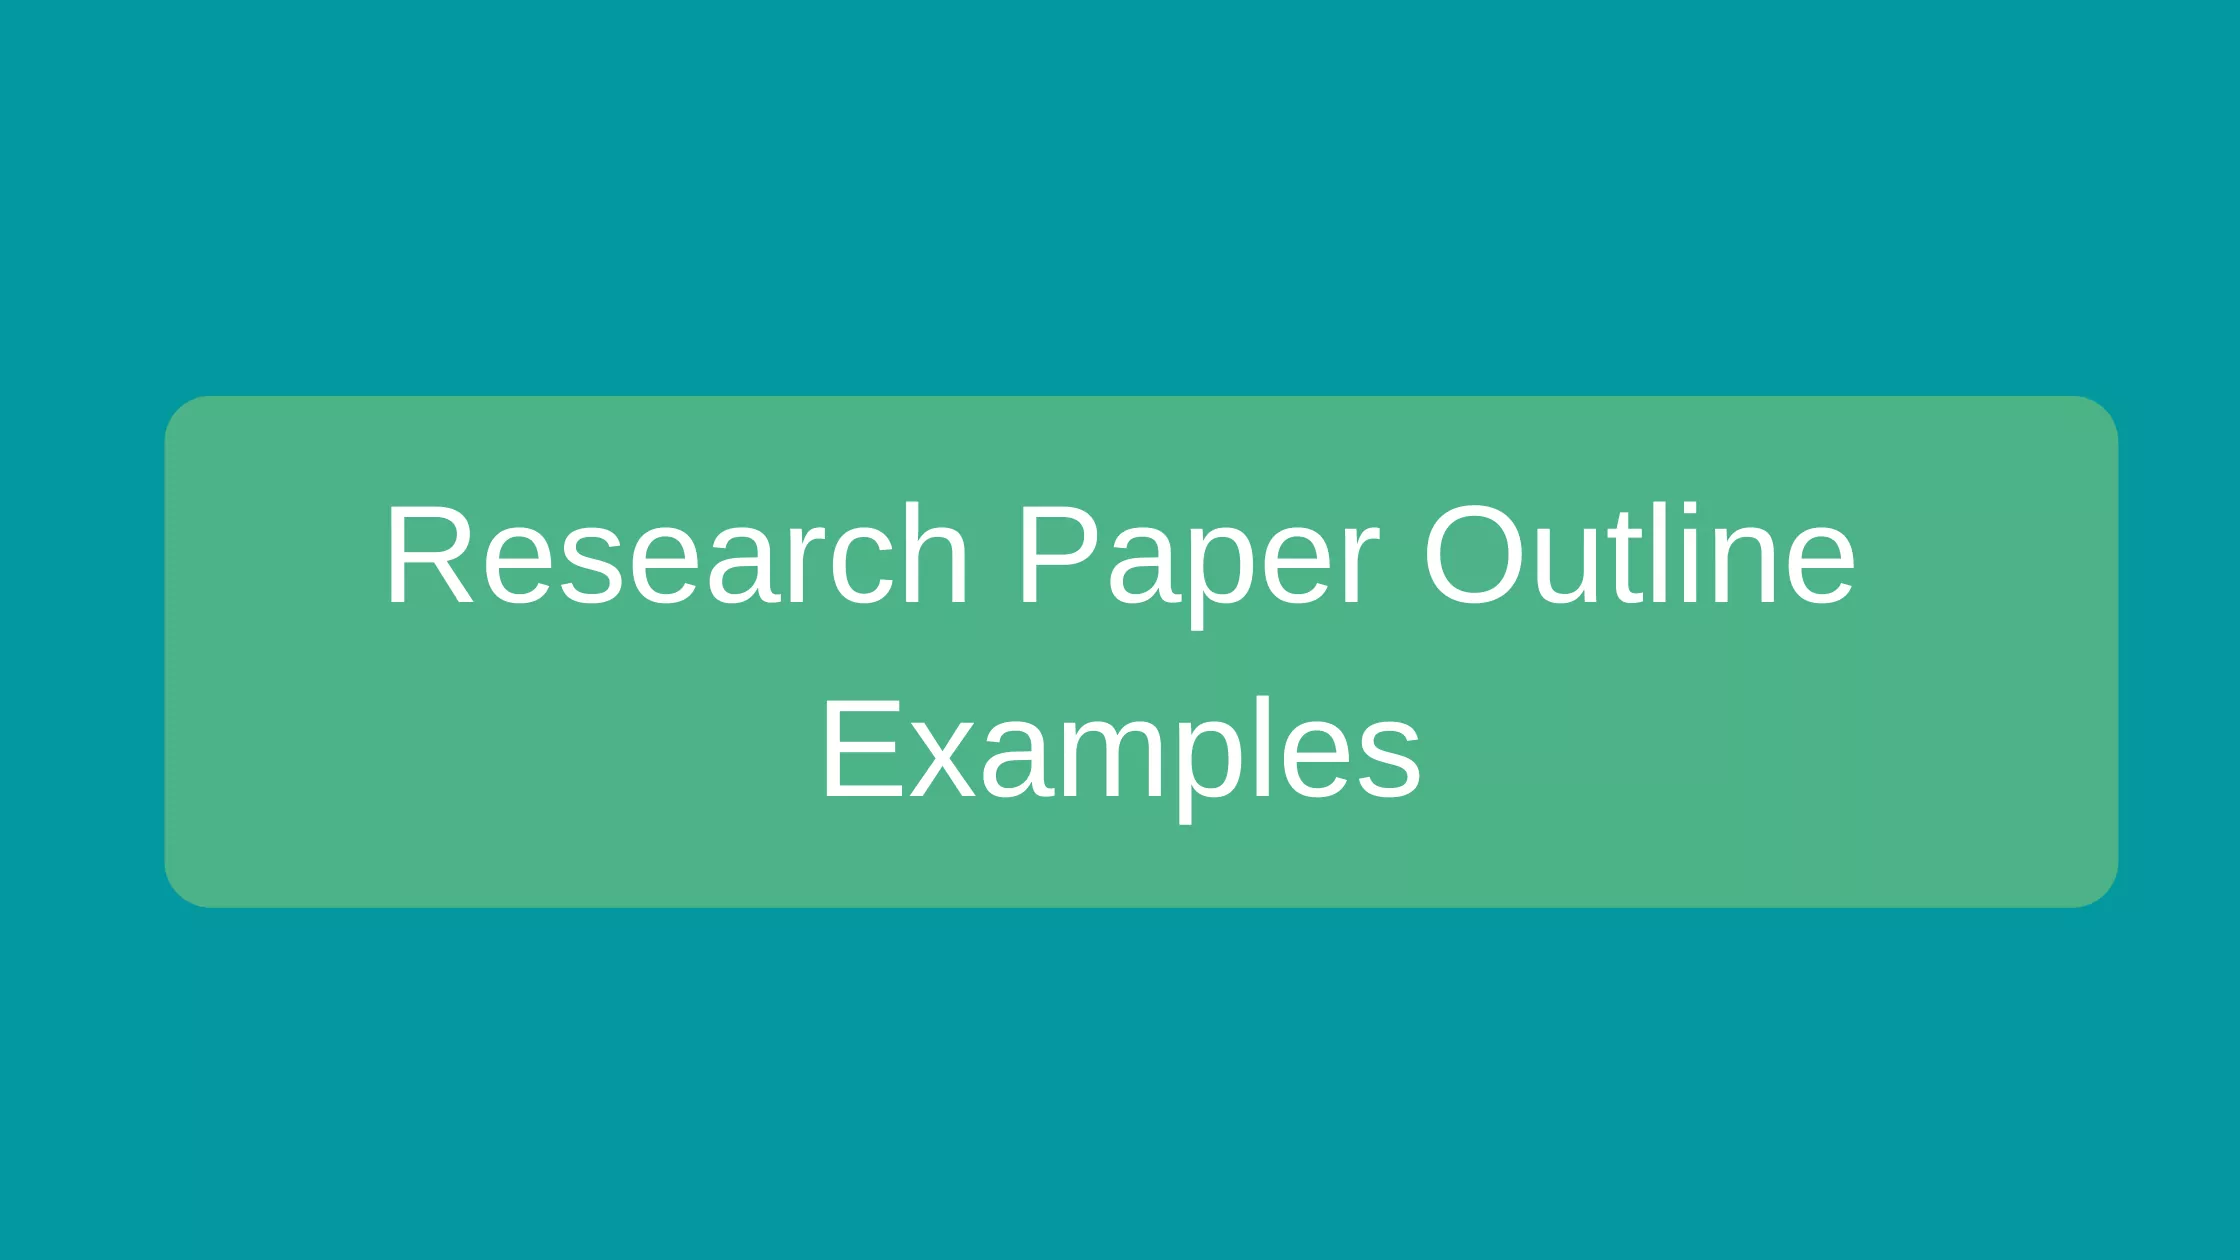 Research paper outline examples